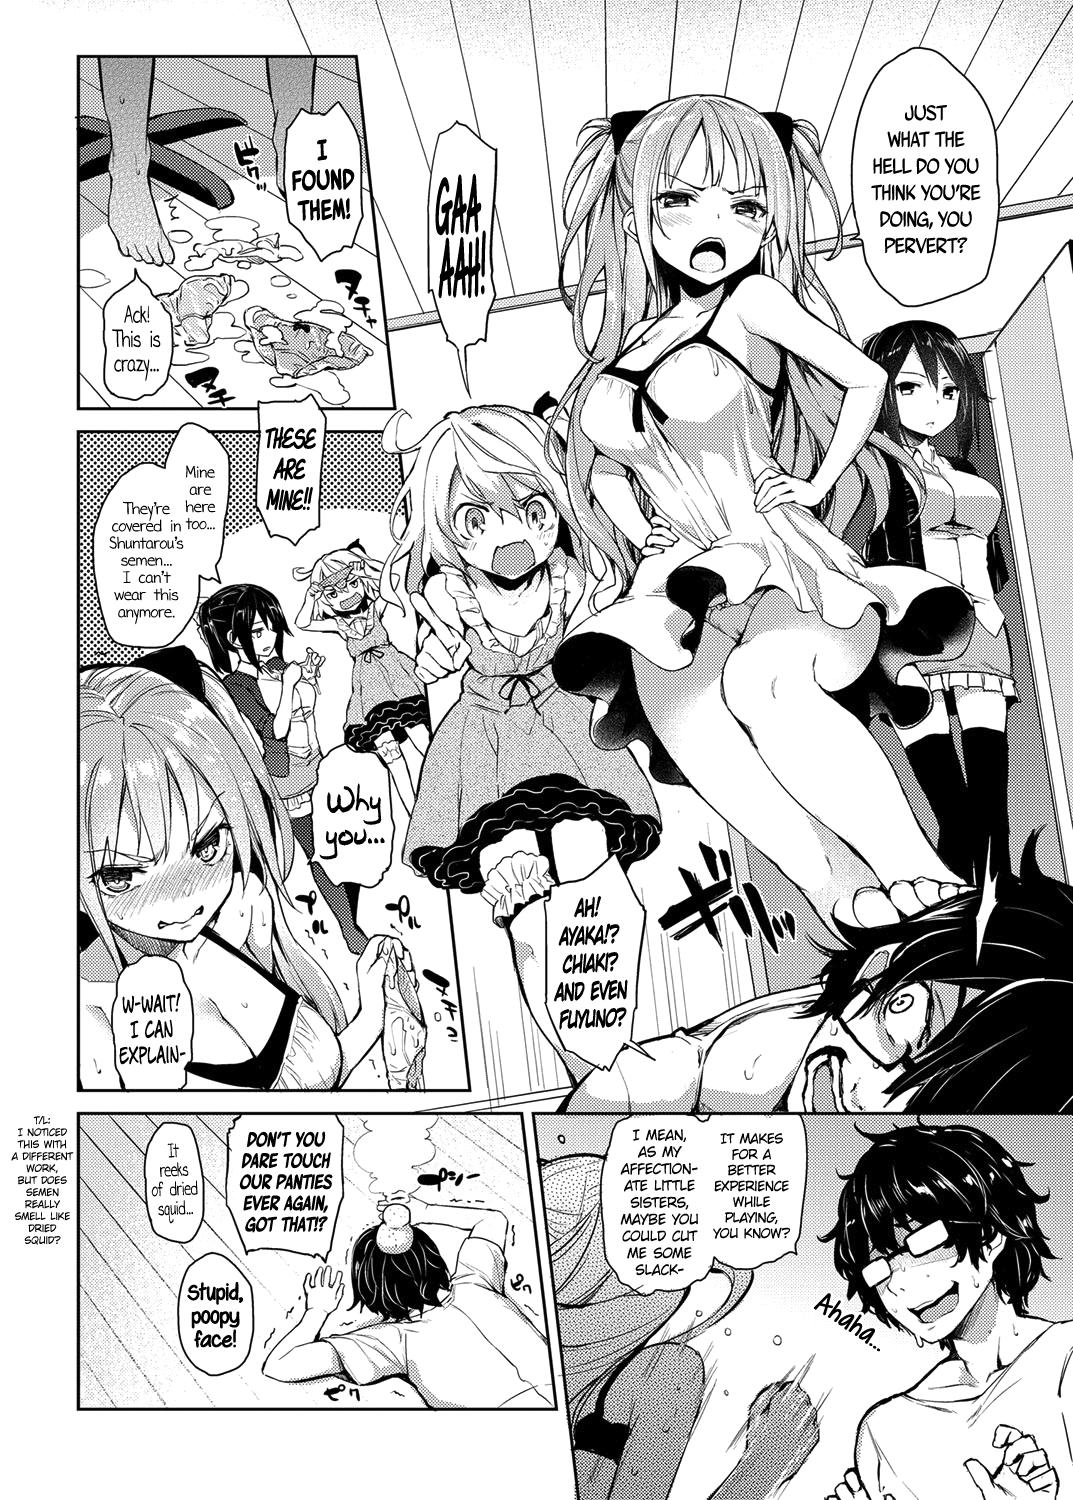 Bulge Ane Taiken Shuukan | The Older Sister Experience for a Week Amature - Page 2